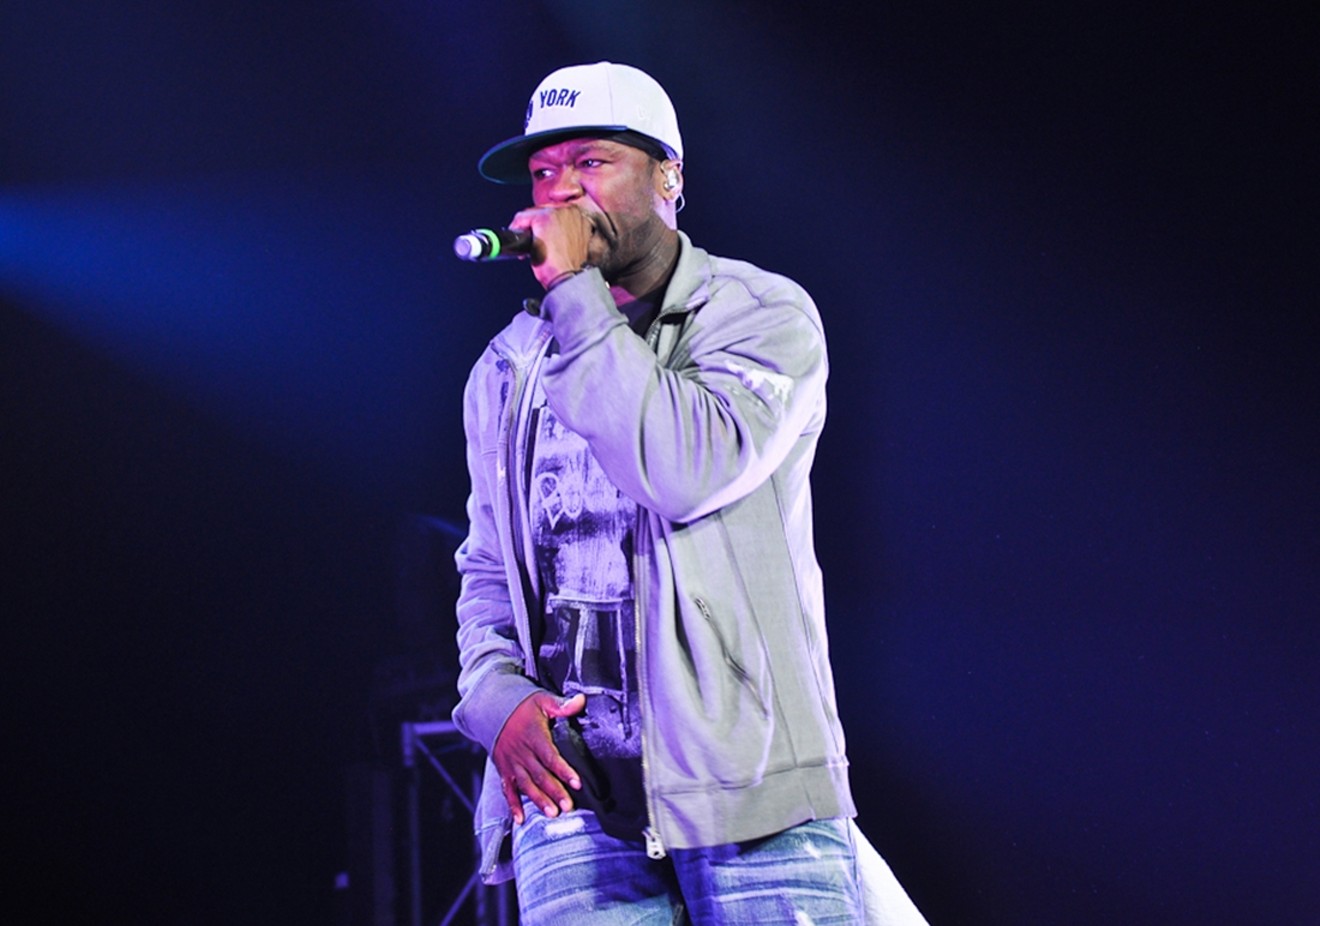 Live Nation's Lawnie Pass already includes more than a dozen Phoenix shows, including 50 Cent in March.